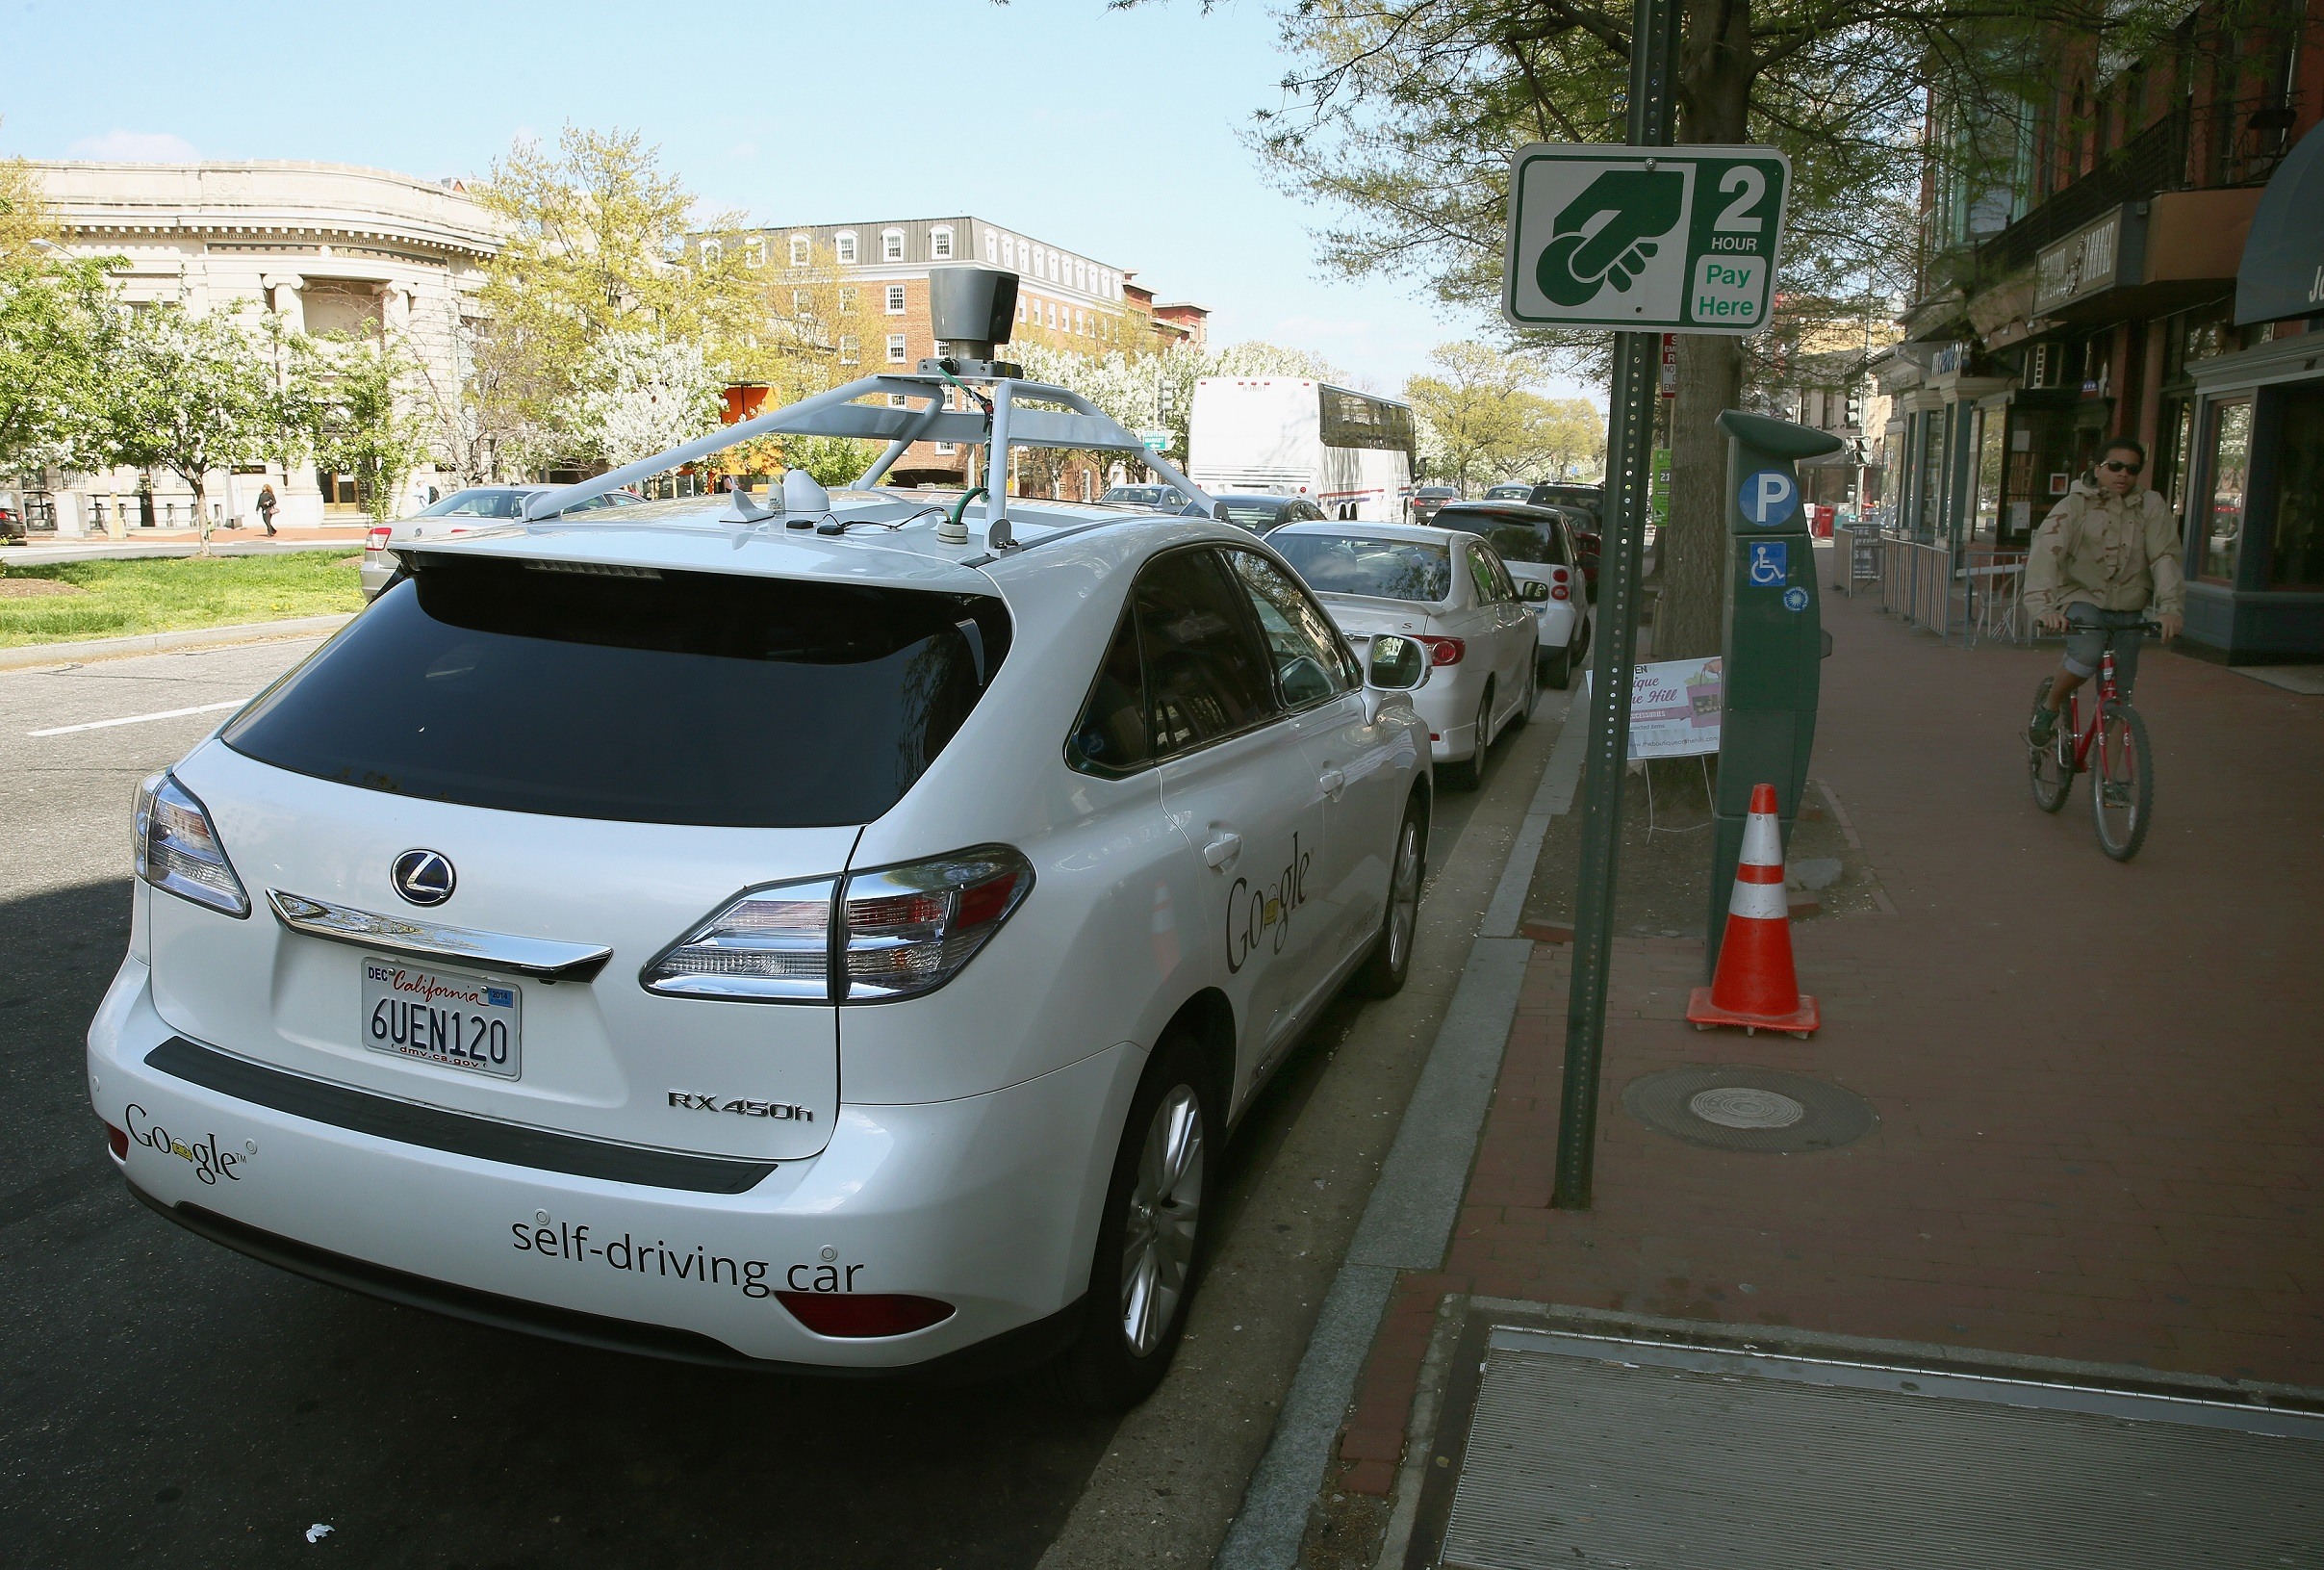 Does Your City Already Have Driverless Cars? The Answer Might Surprise You